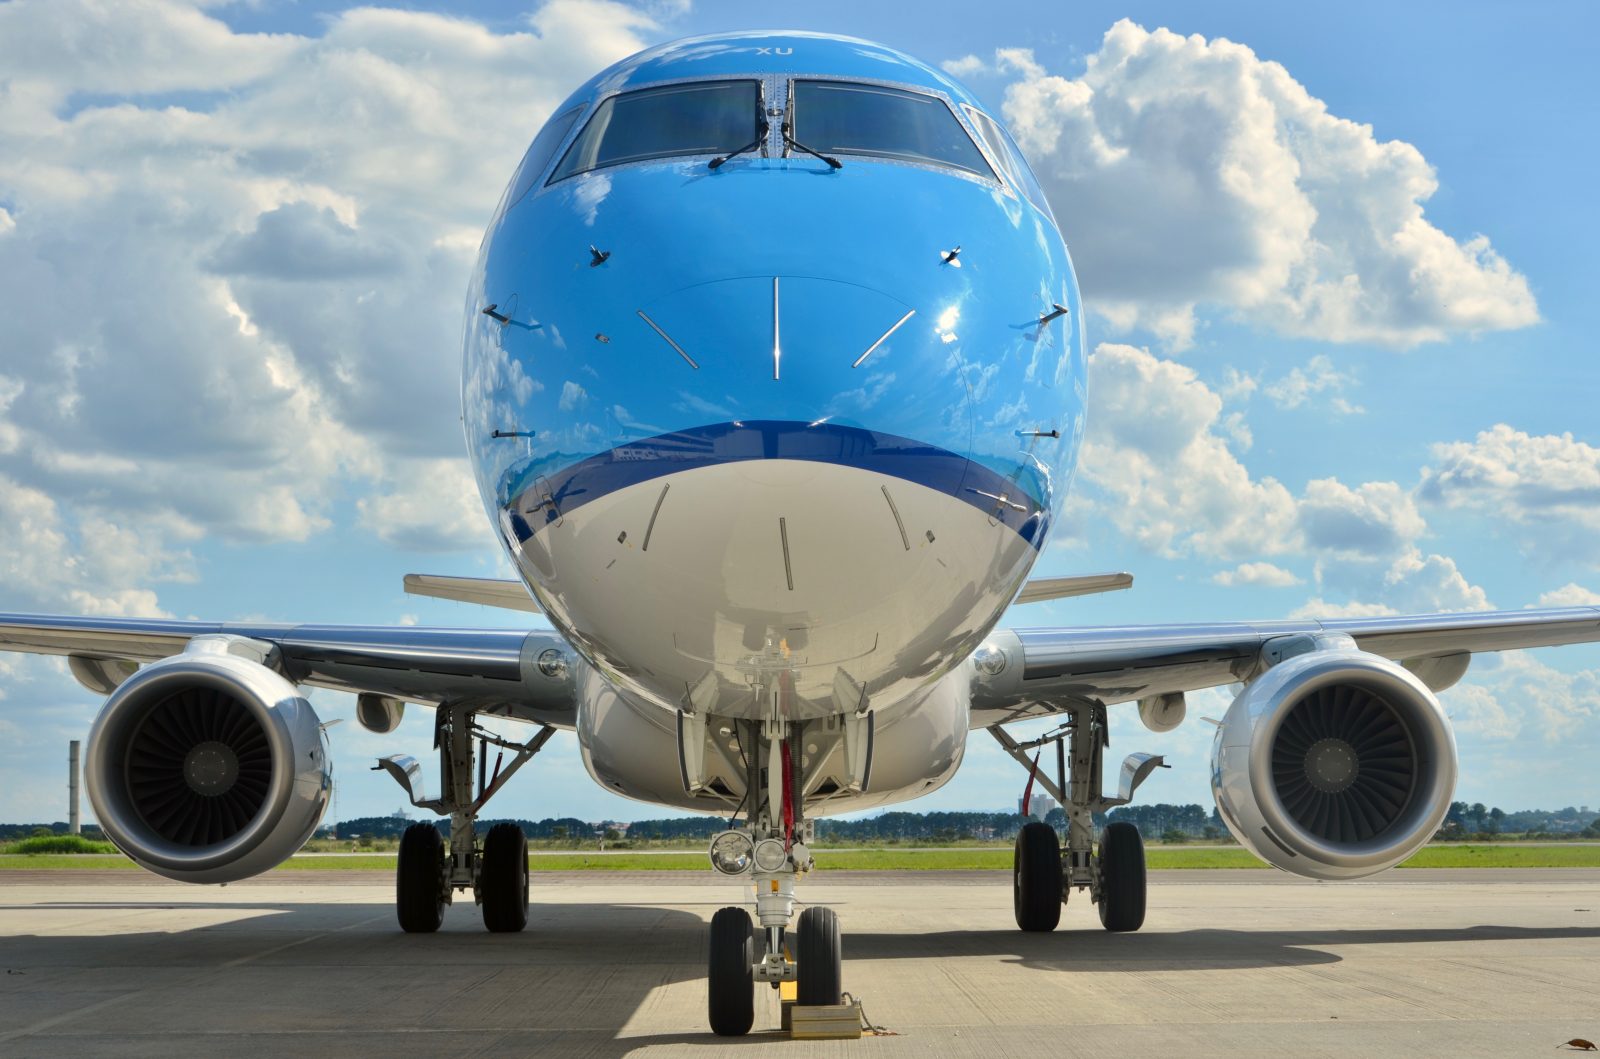 RECRUITING NOW: KLM CityHopper is Now Hiring New Cabin Crew